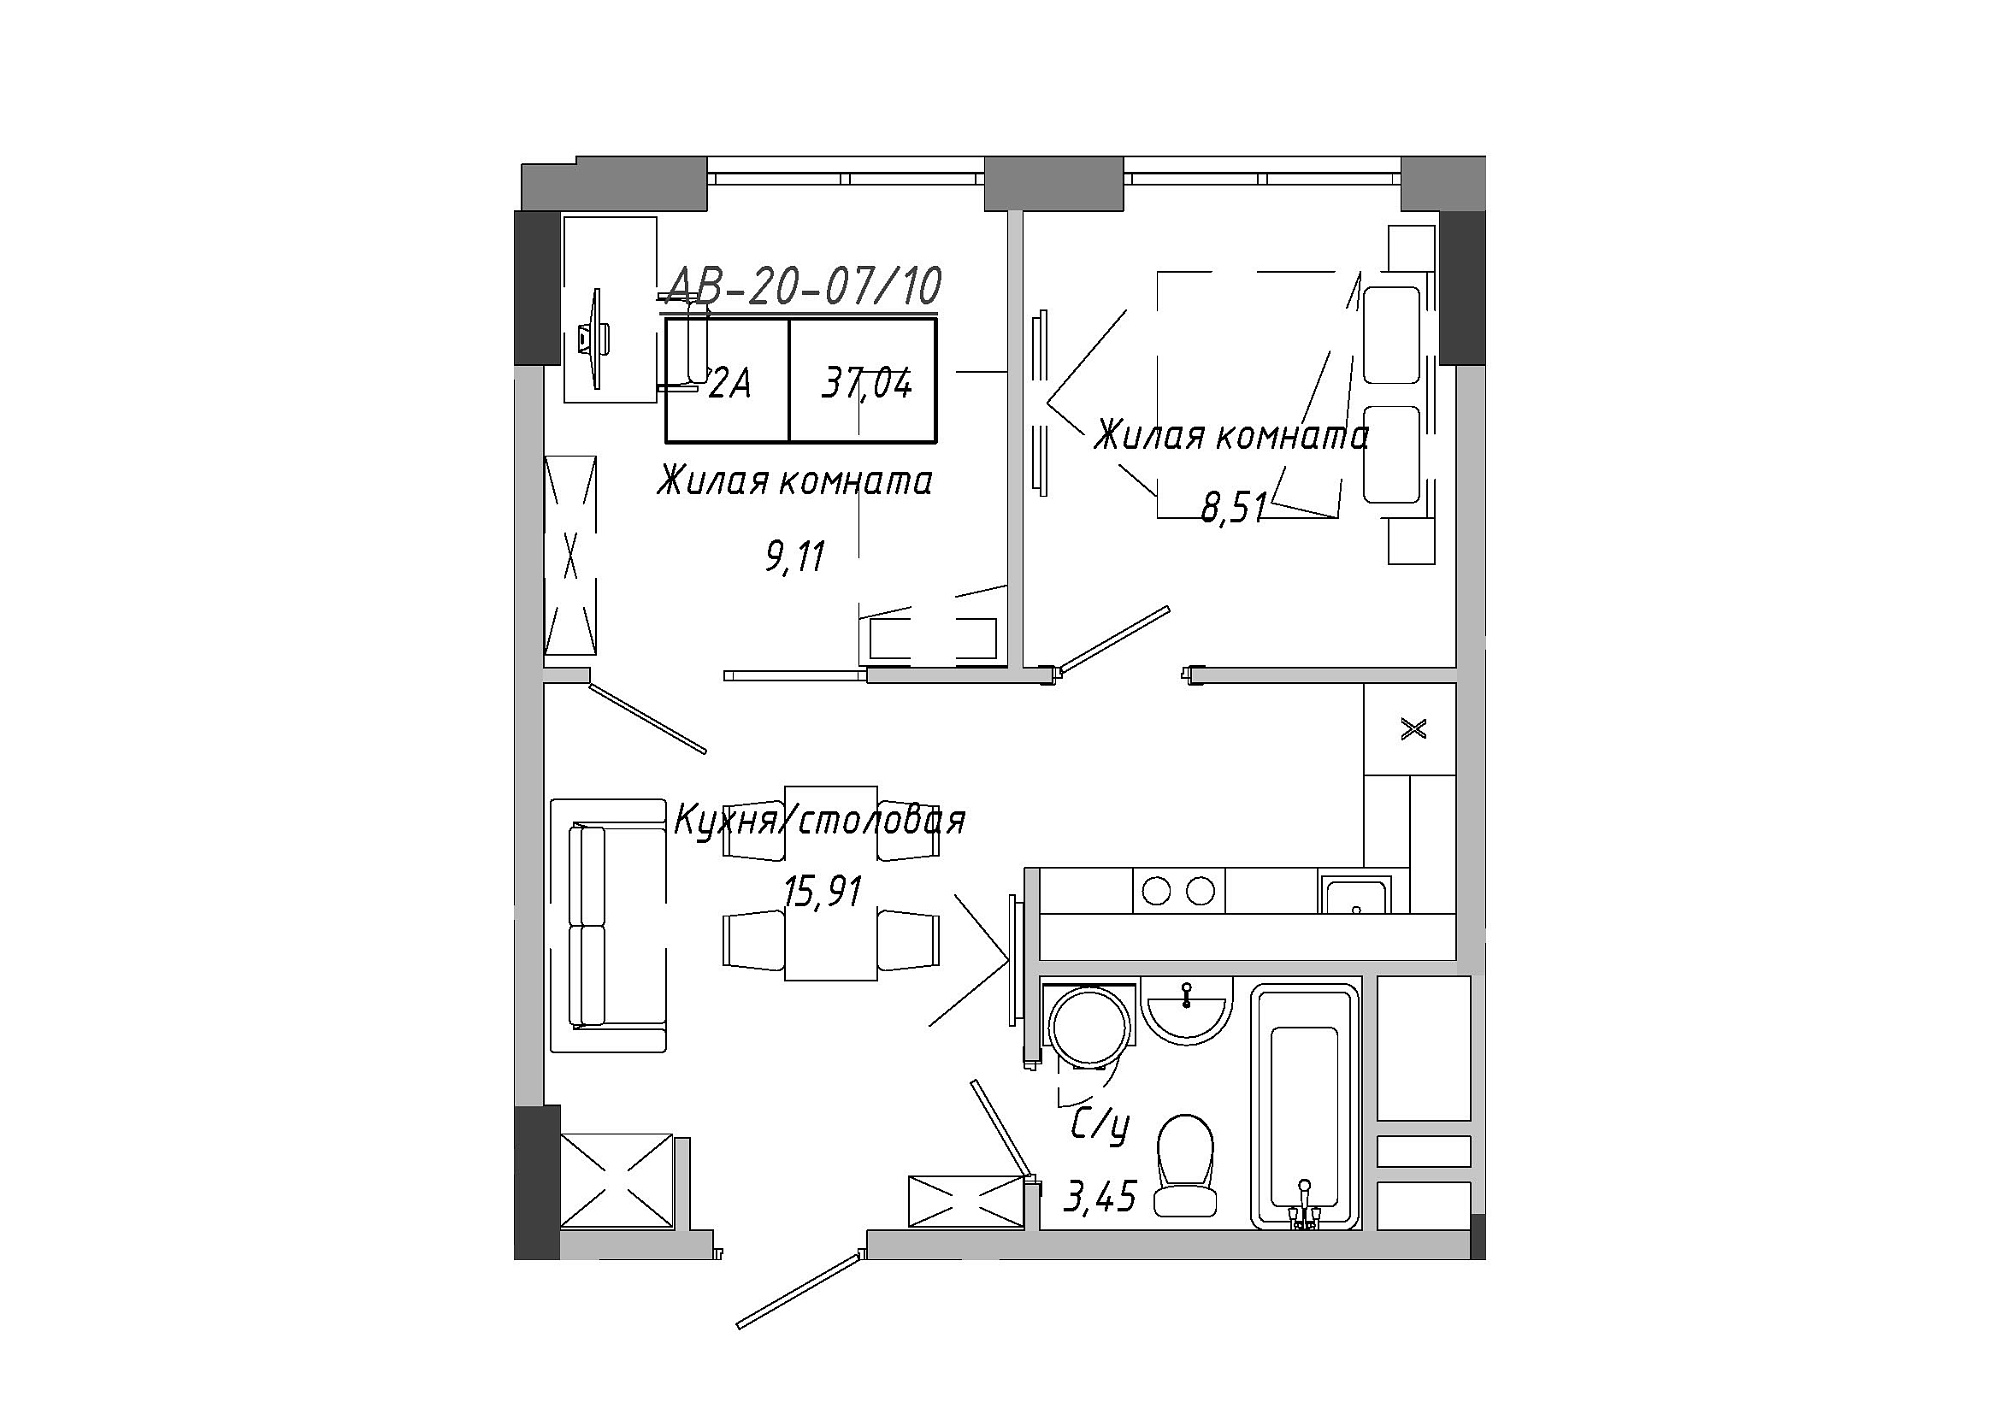 Planning 2-rm flats area 37.15m2, AB-20-07/00010.